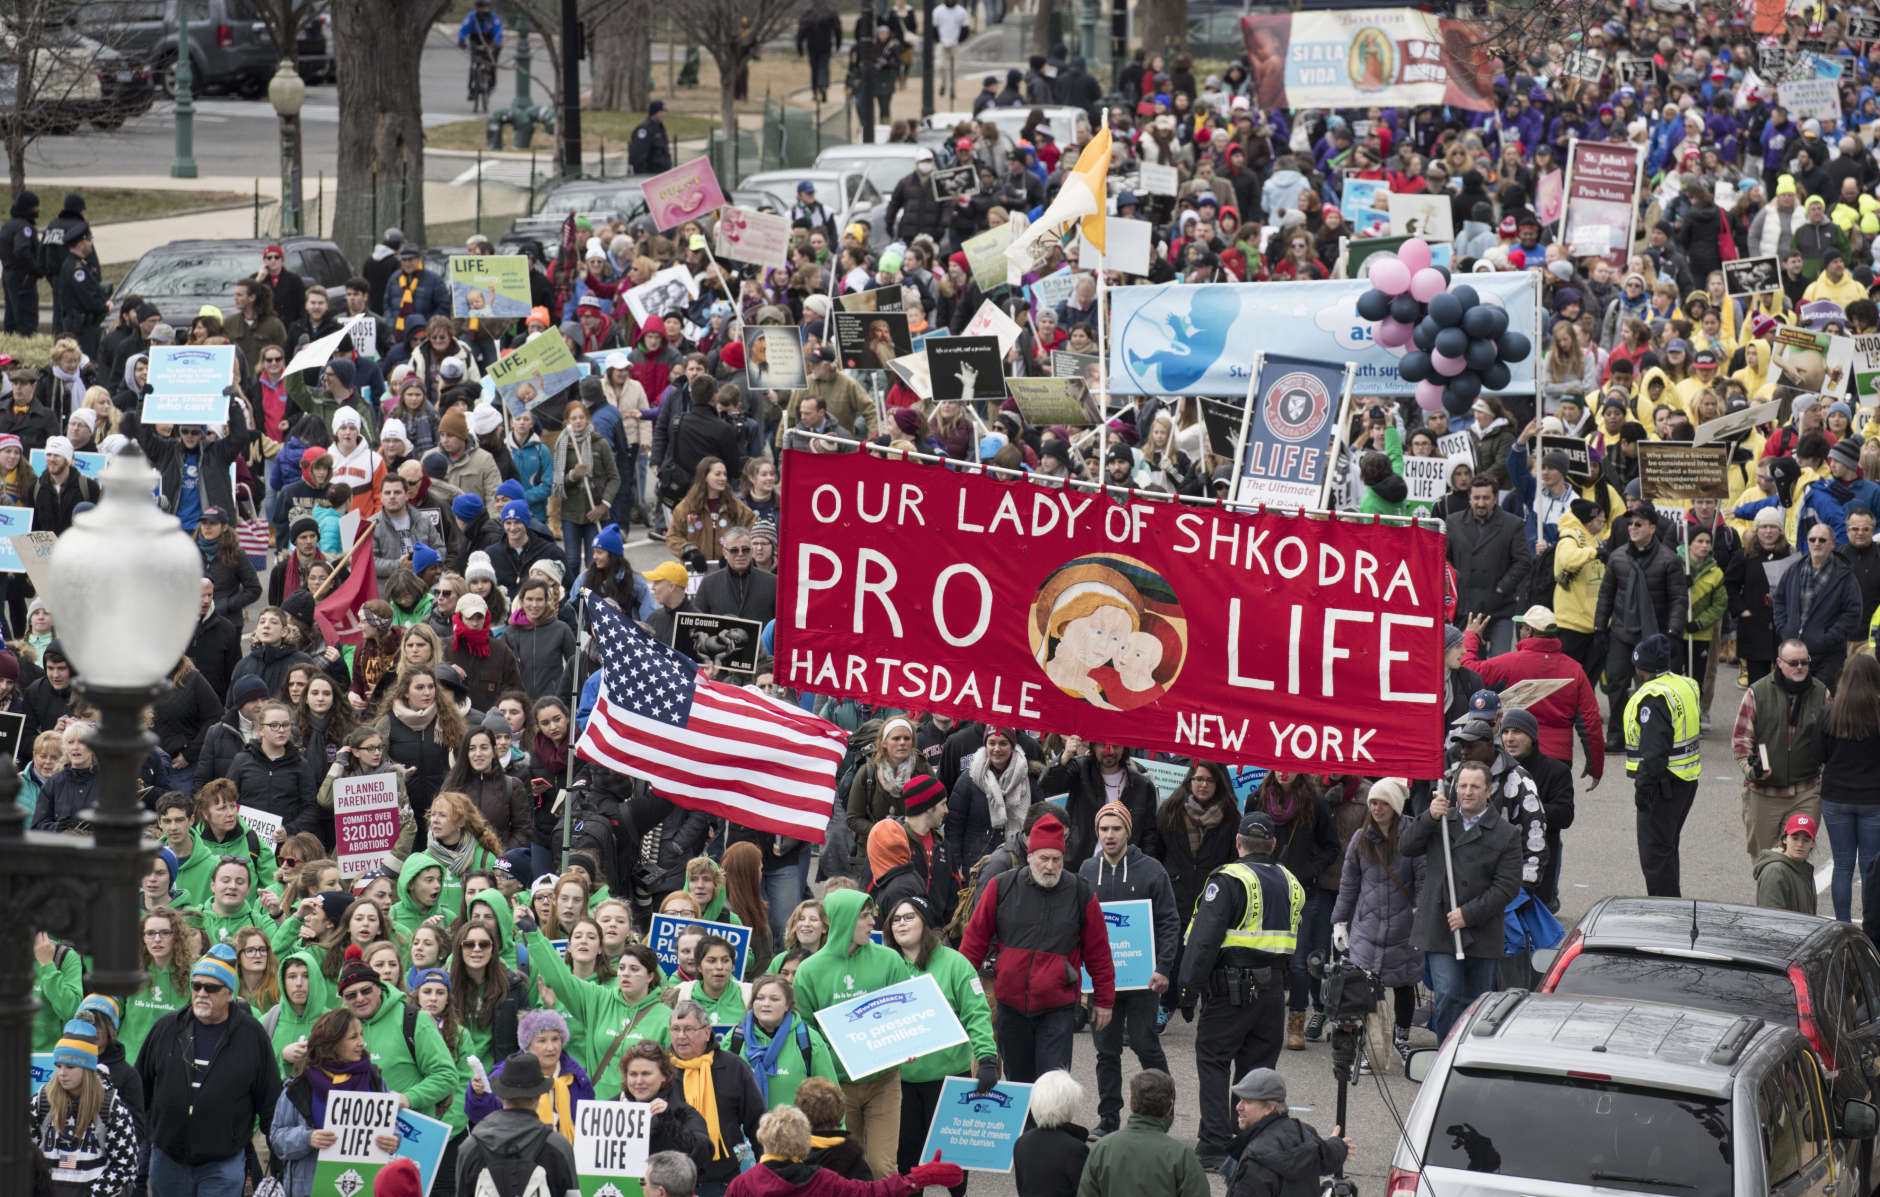 Anti-abortion demonstrators arrive on Capitol Hill in Washington, Friday, Jan. 27, 2017, during the March for Life. The march, held each year in the Washington marks the anniversary of the 1973 Supreme Court decision legalizing abortion. (AP Photo/J. Scott Applewhite)